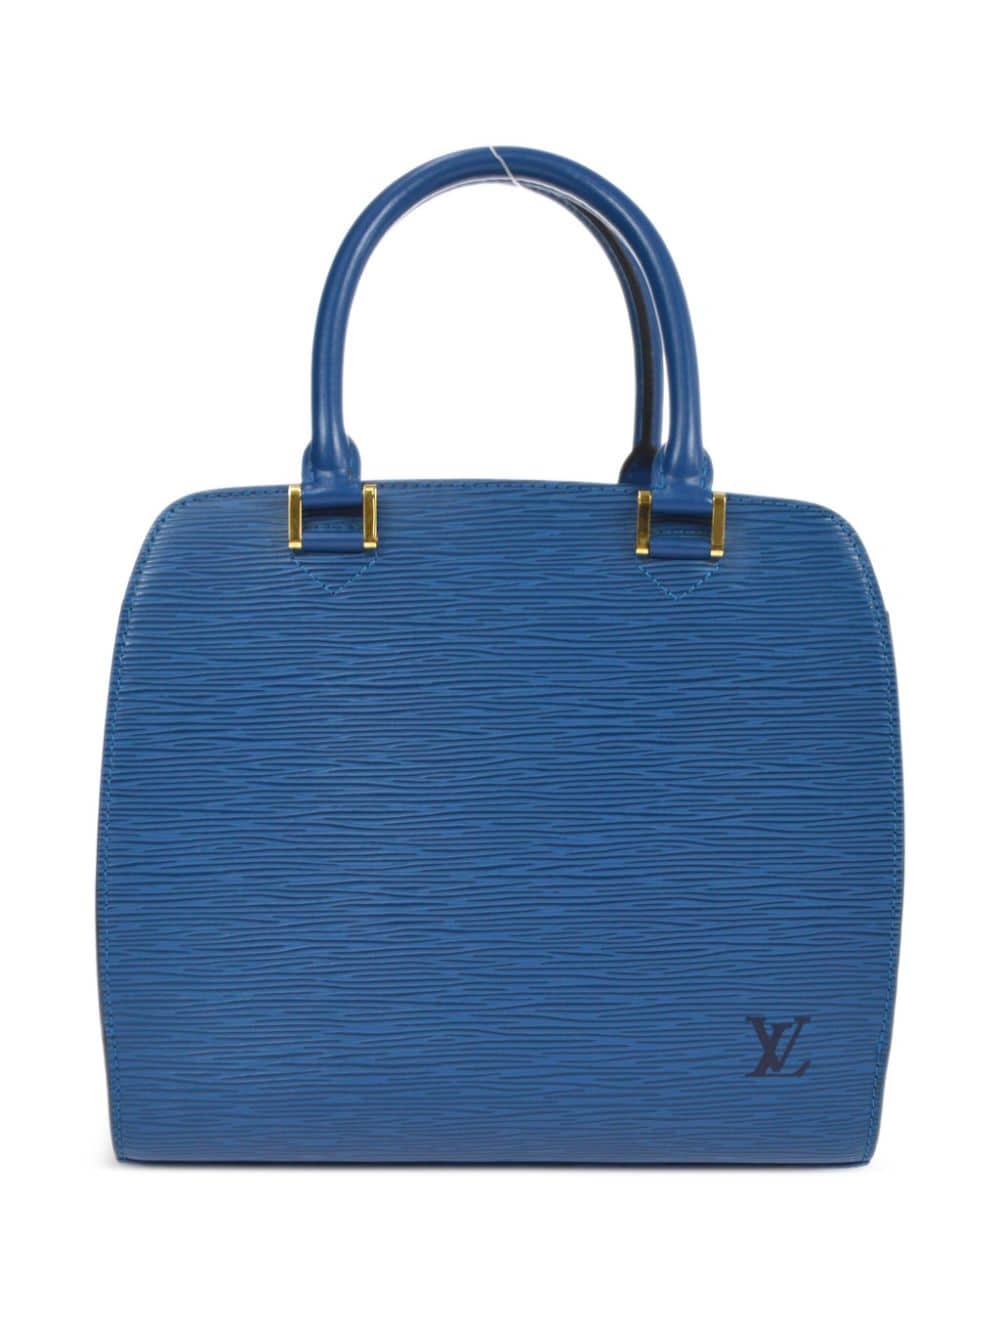 Louis Vuitton Pre-Owned 1997 pre-owned Pont Neuf handbag - Blue von Louis Vuitton Pre-Owned